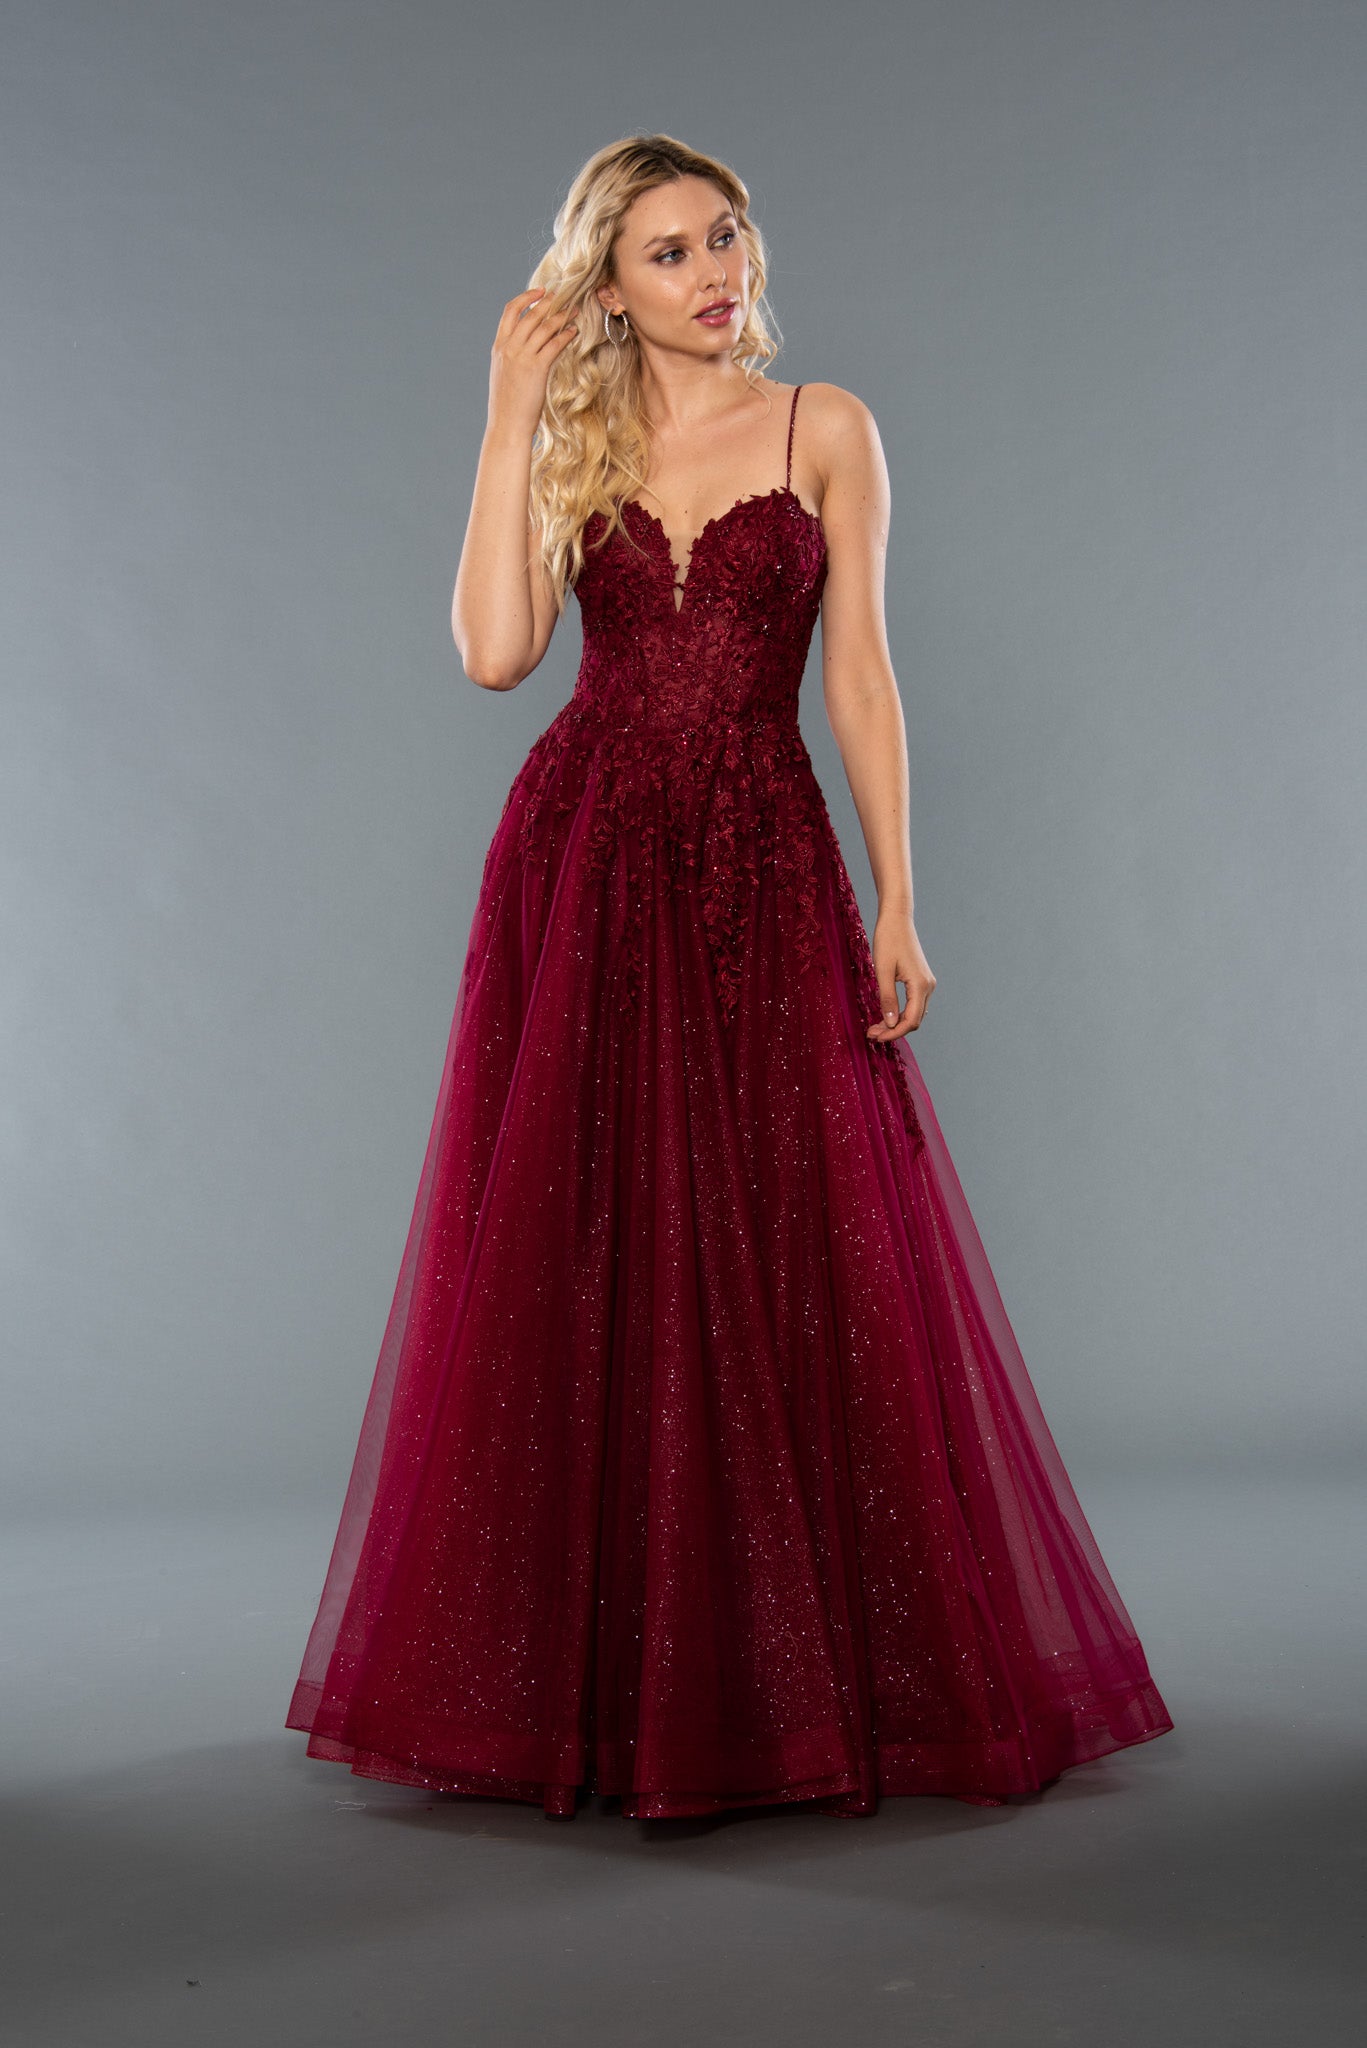 Stella Couture 22027 is an a line with a shimmer tulle ballgown skirt. Fitted sheer corset style lace bodice with plunging neckline. spaghetti straps. Available Sizes: 2-18  Available Colors: Green, Burgundy